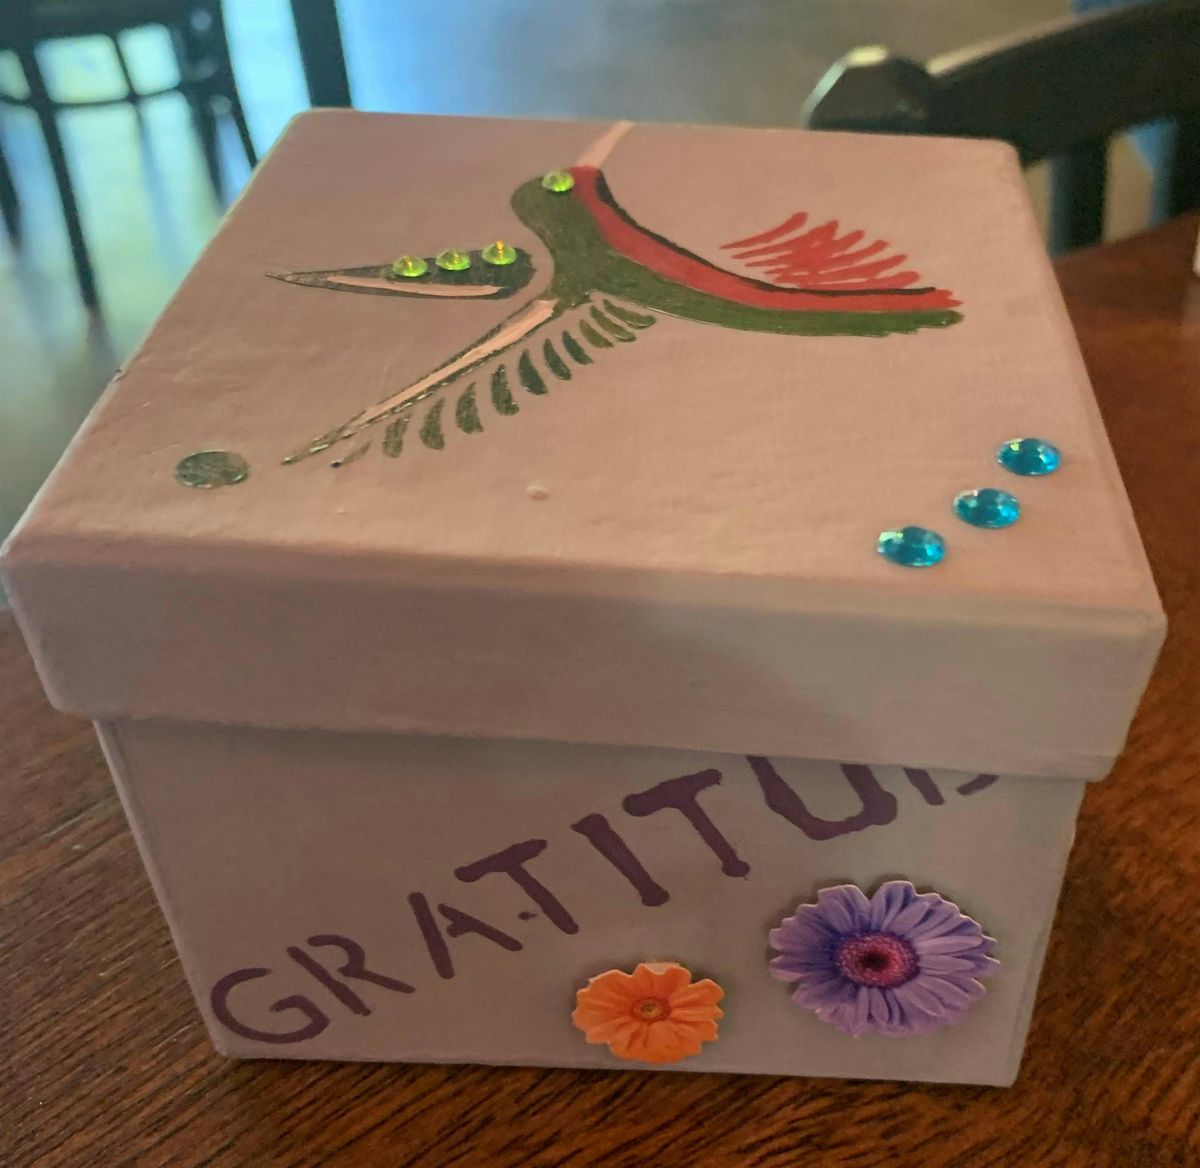 Craft event - Design your own trinket box at O'Gannigans (Prince Frederick), Sunday, May 5, at 5:00 p.m.